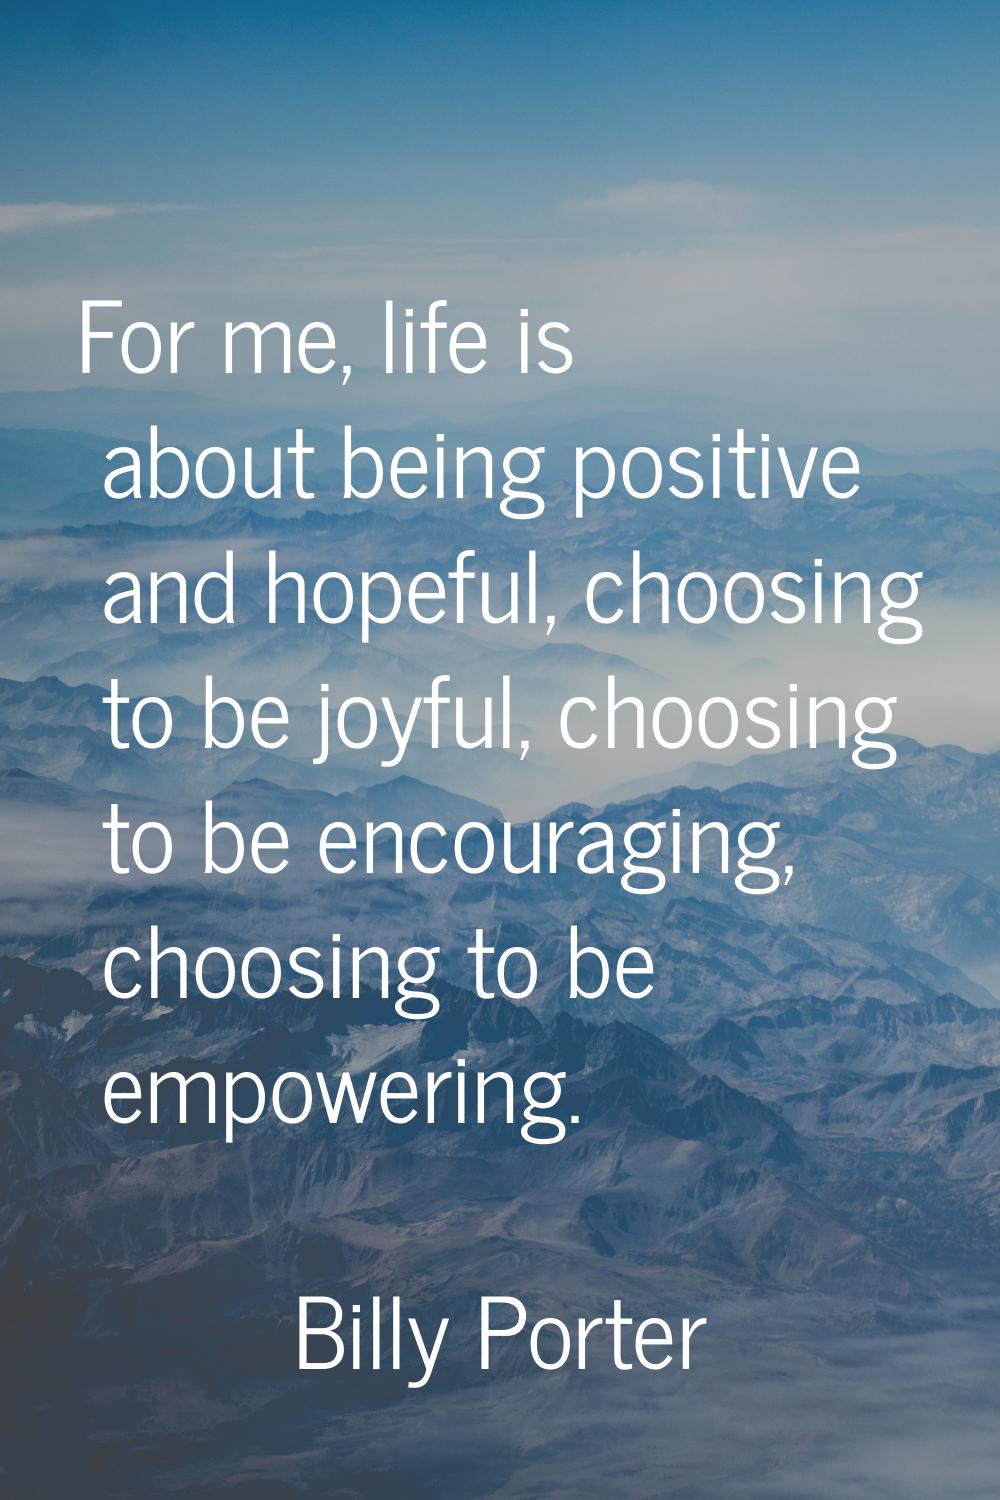 For me, life is about being positive and hopeful, choosing to be joyful, choosing to be encouraging